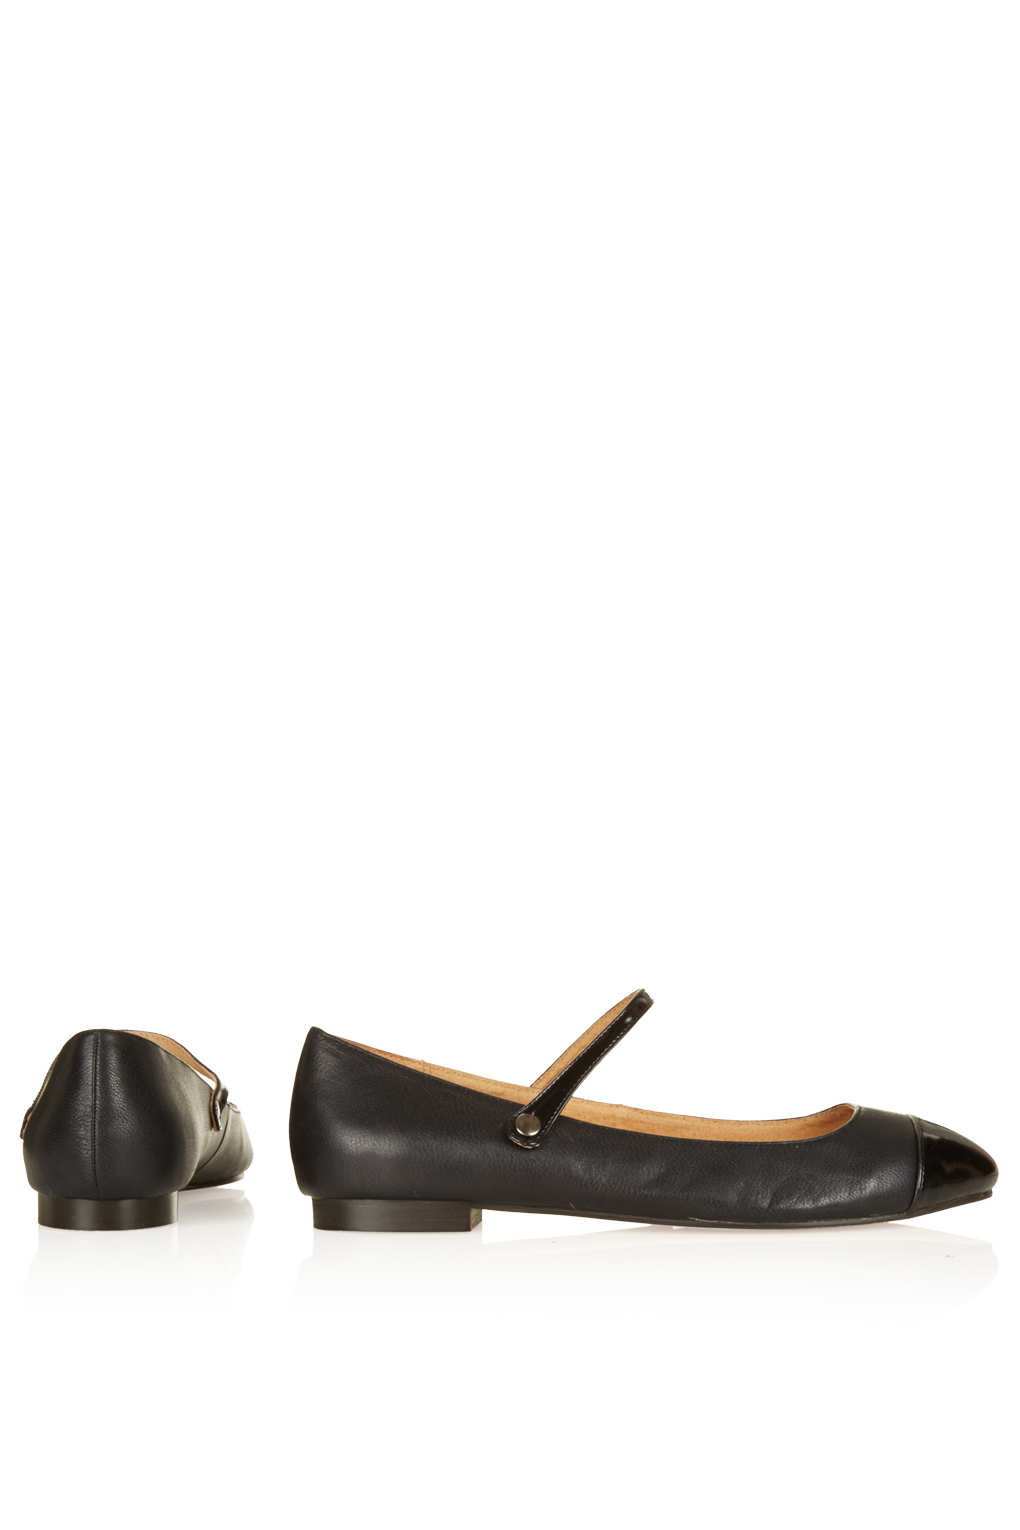 Topshop Mayleen Dolly Shoes in Black | Lyst